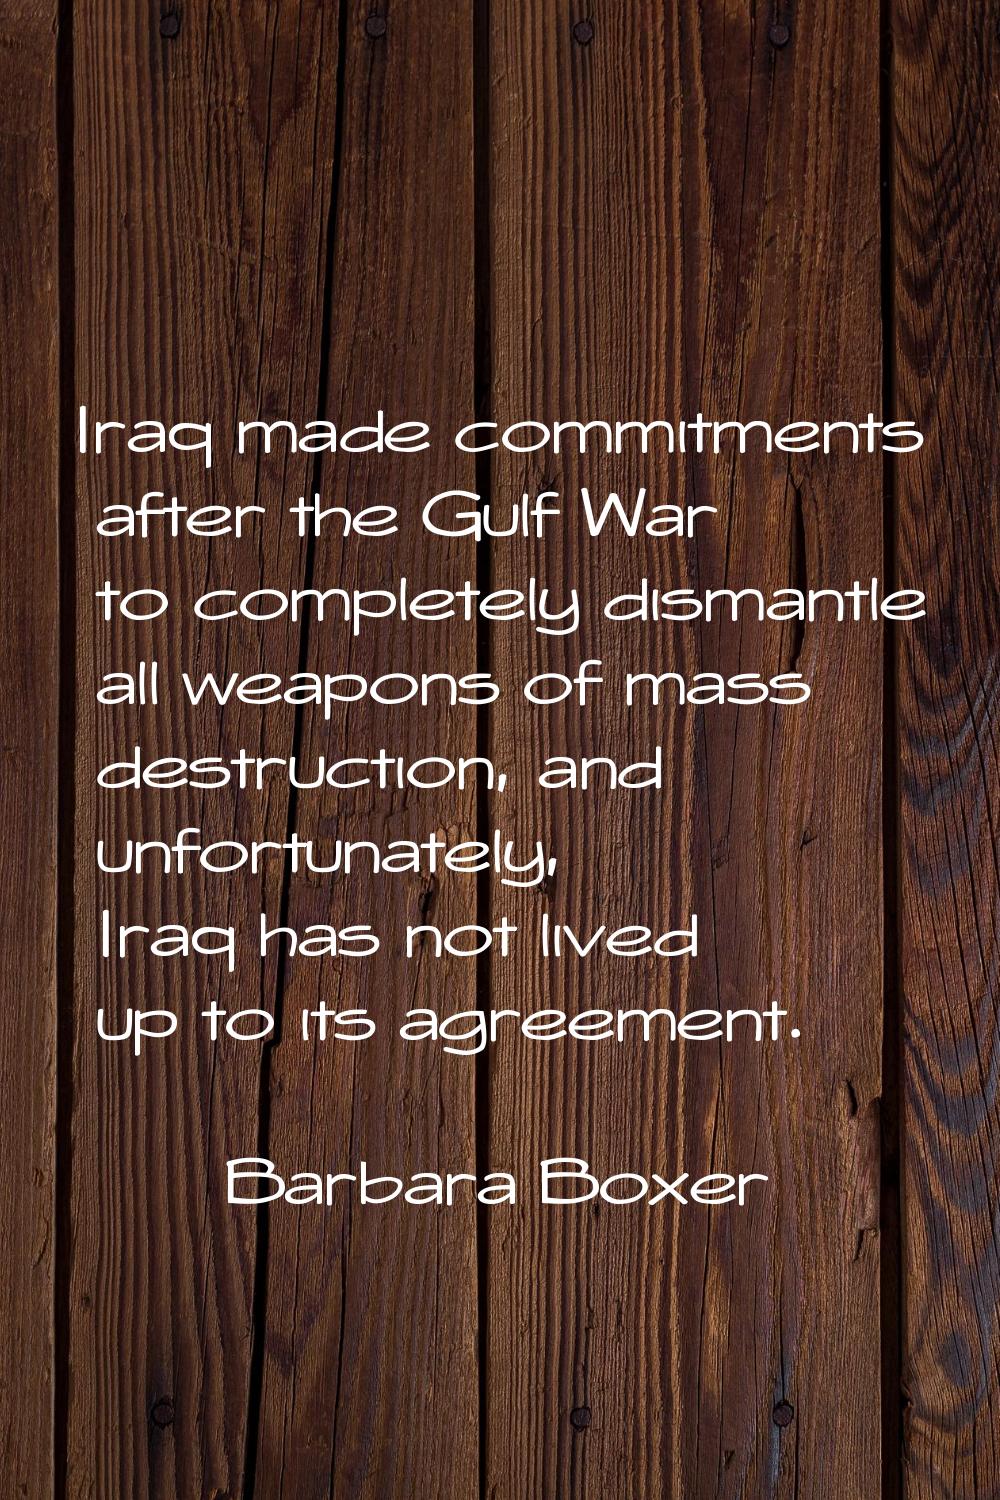 Iraq made commitments after the Gulf War to completely dismantle all weapons of mass destruction, a